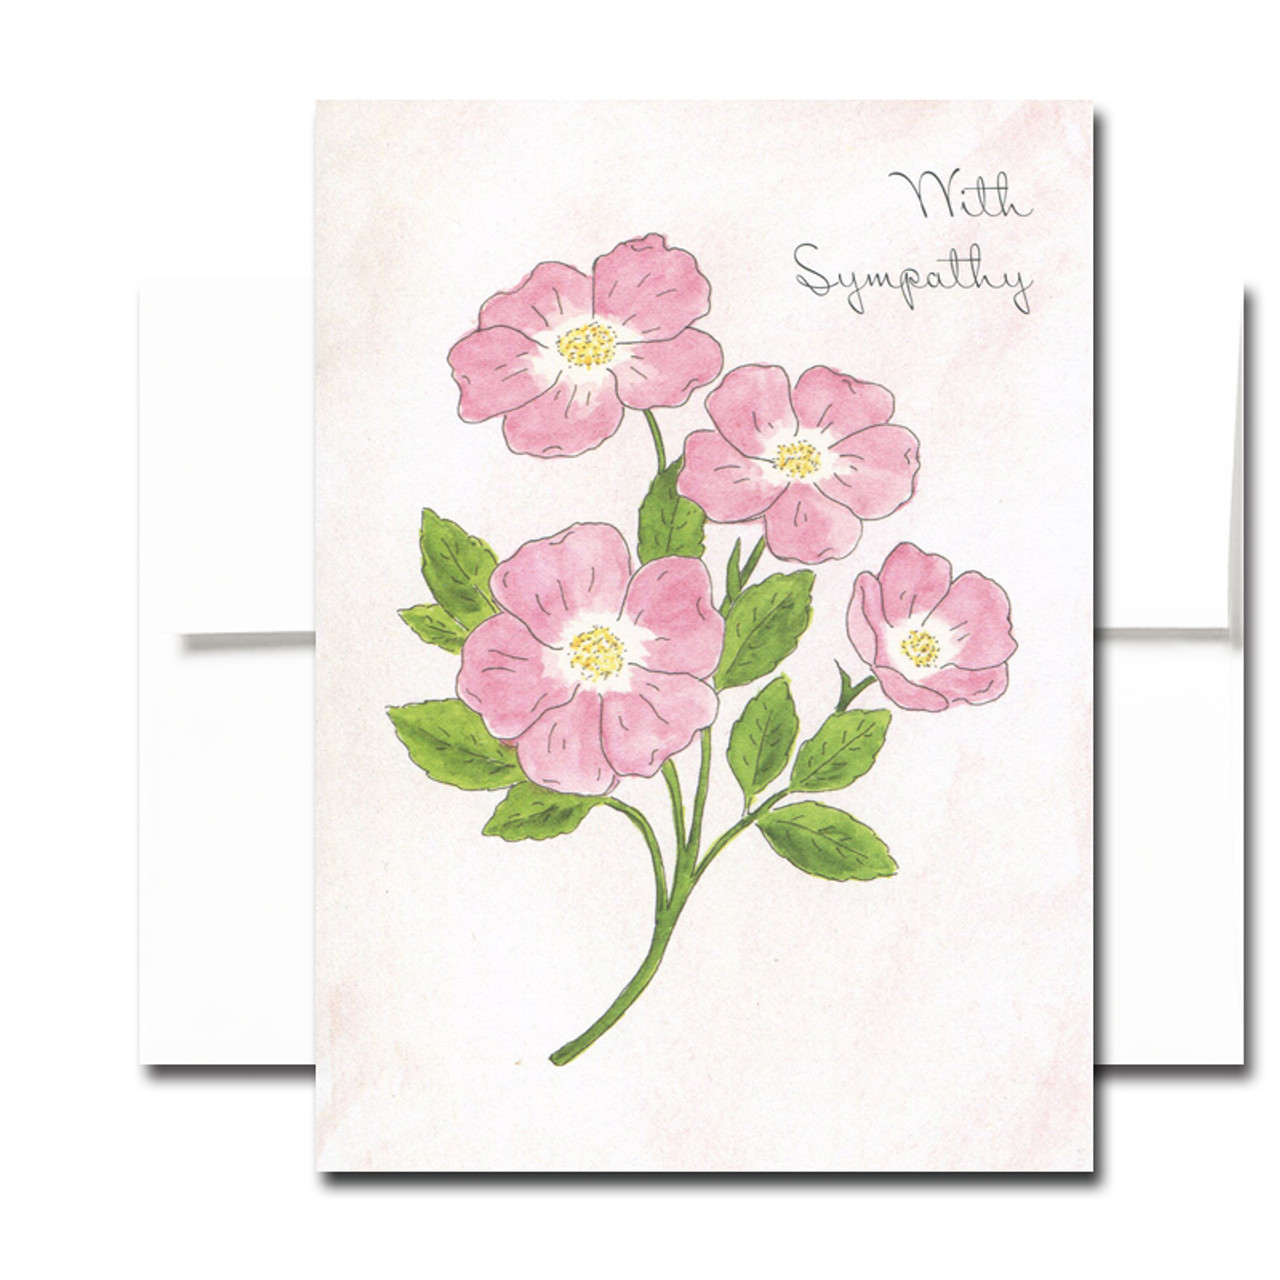 Sympathy Card: Sweet Briar. Cover has a hand-painted watercolor illustration and the words With Sympathy